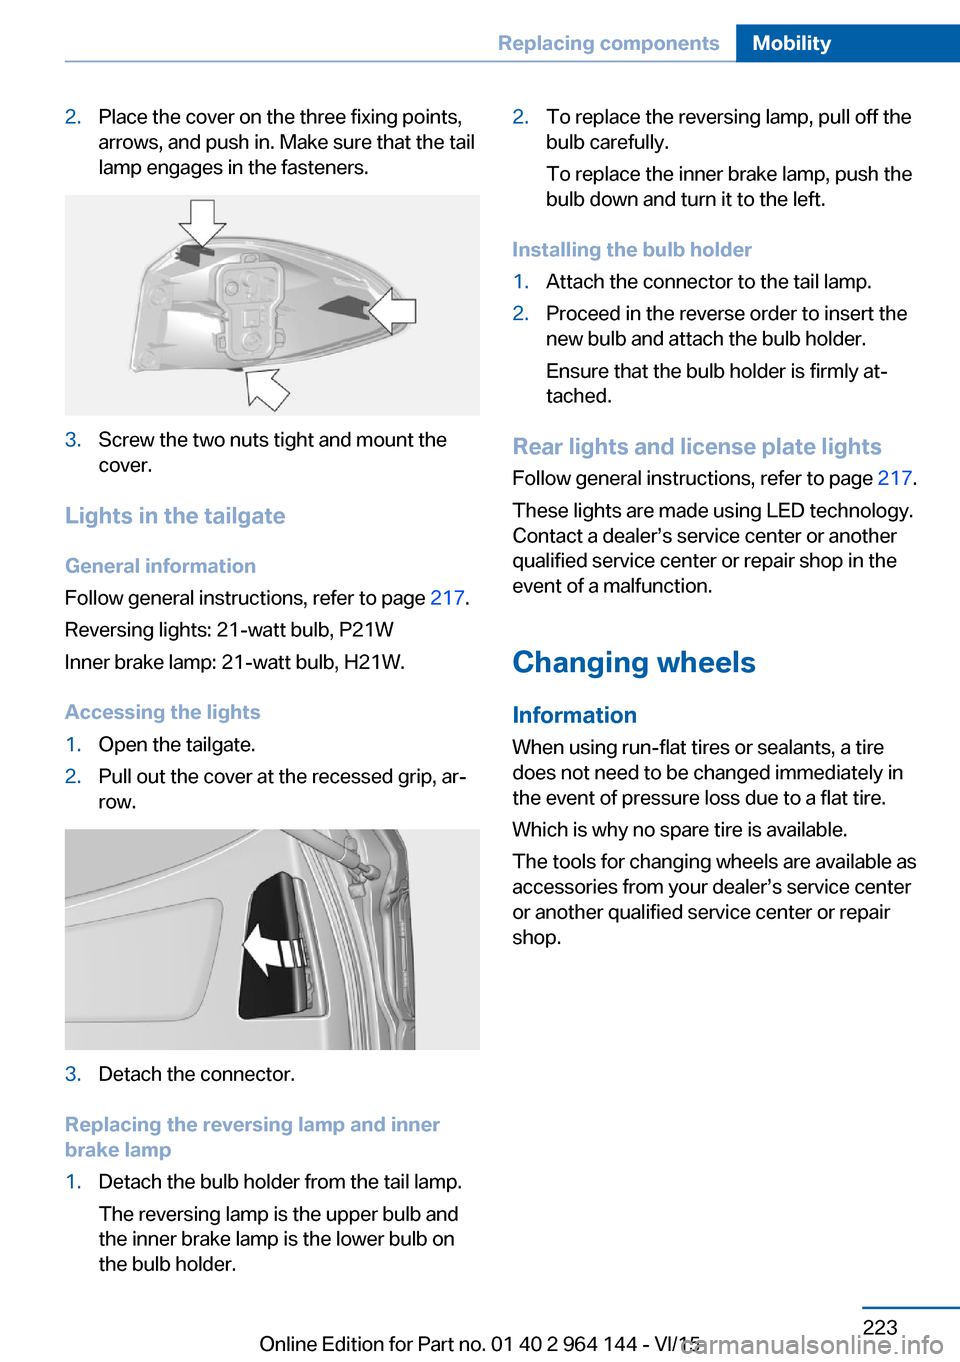 BMW X4 2016 F26 Owners Manual 2.Place the cover on the three fixing points,
arrows, and push in. Make sure that the tail
lamp engages in the fasteners.3.Screw the two nuts tight and mount the
cover.
Lights in the tailgate
General 